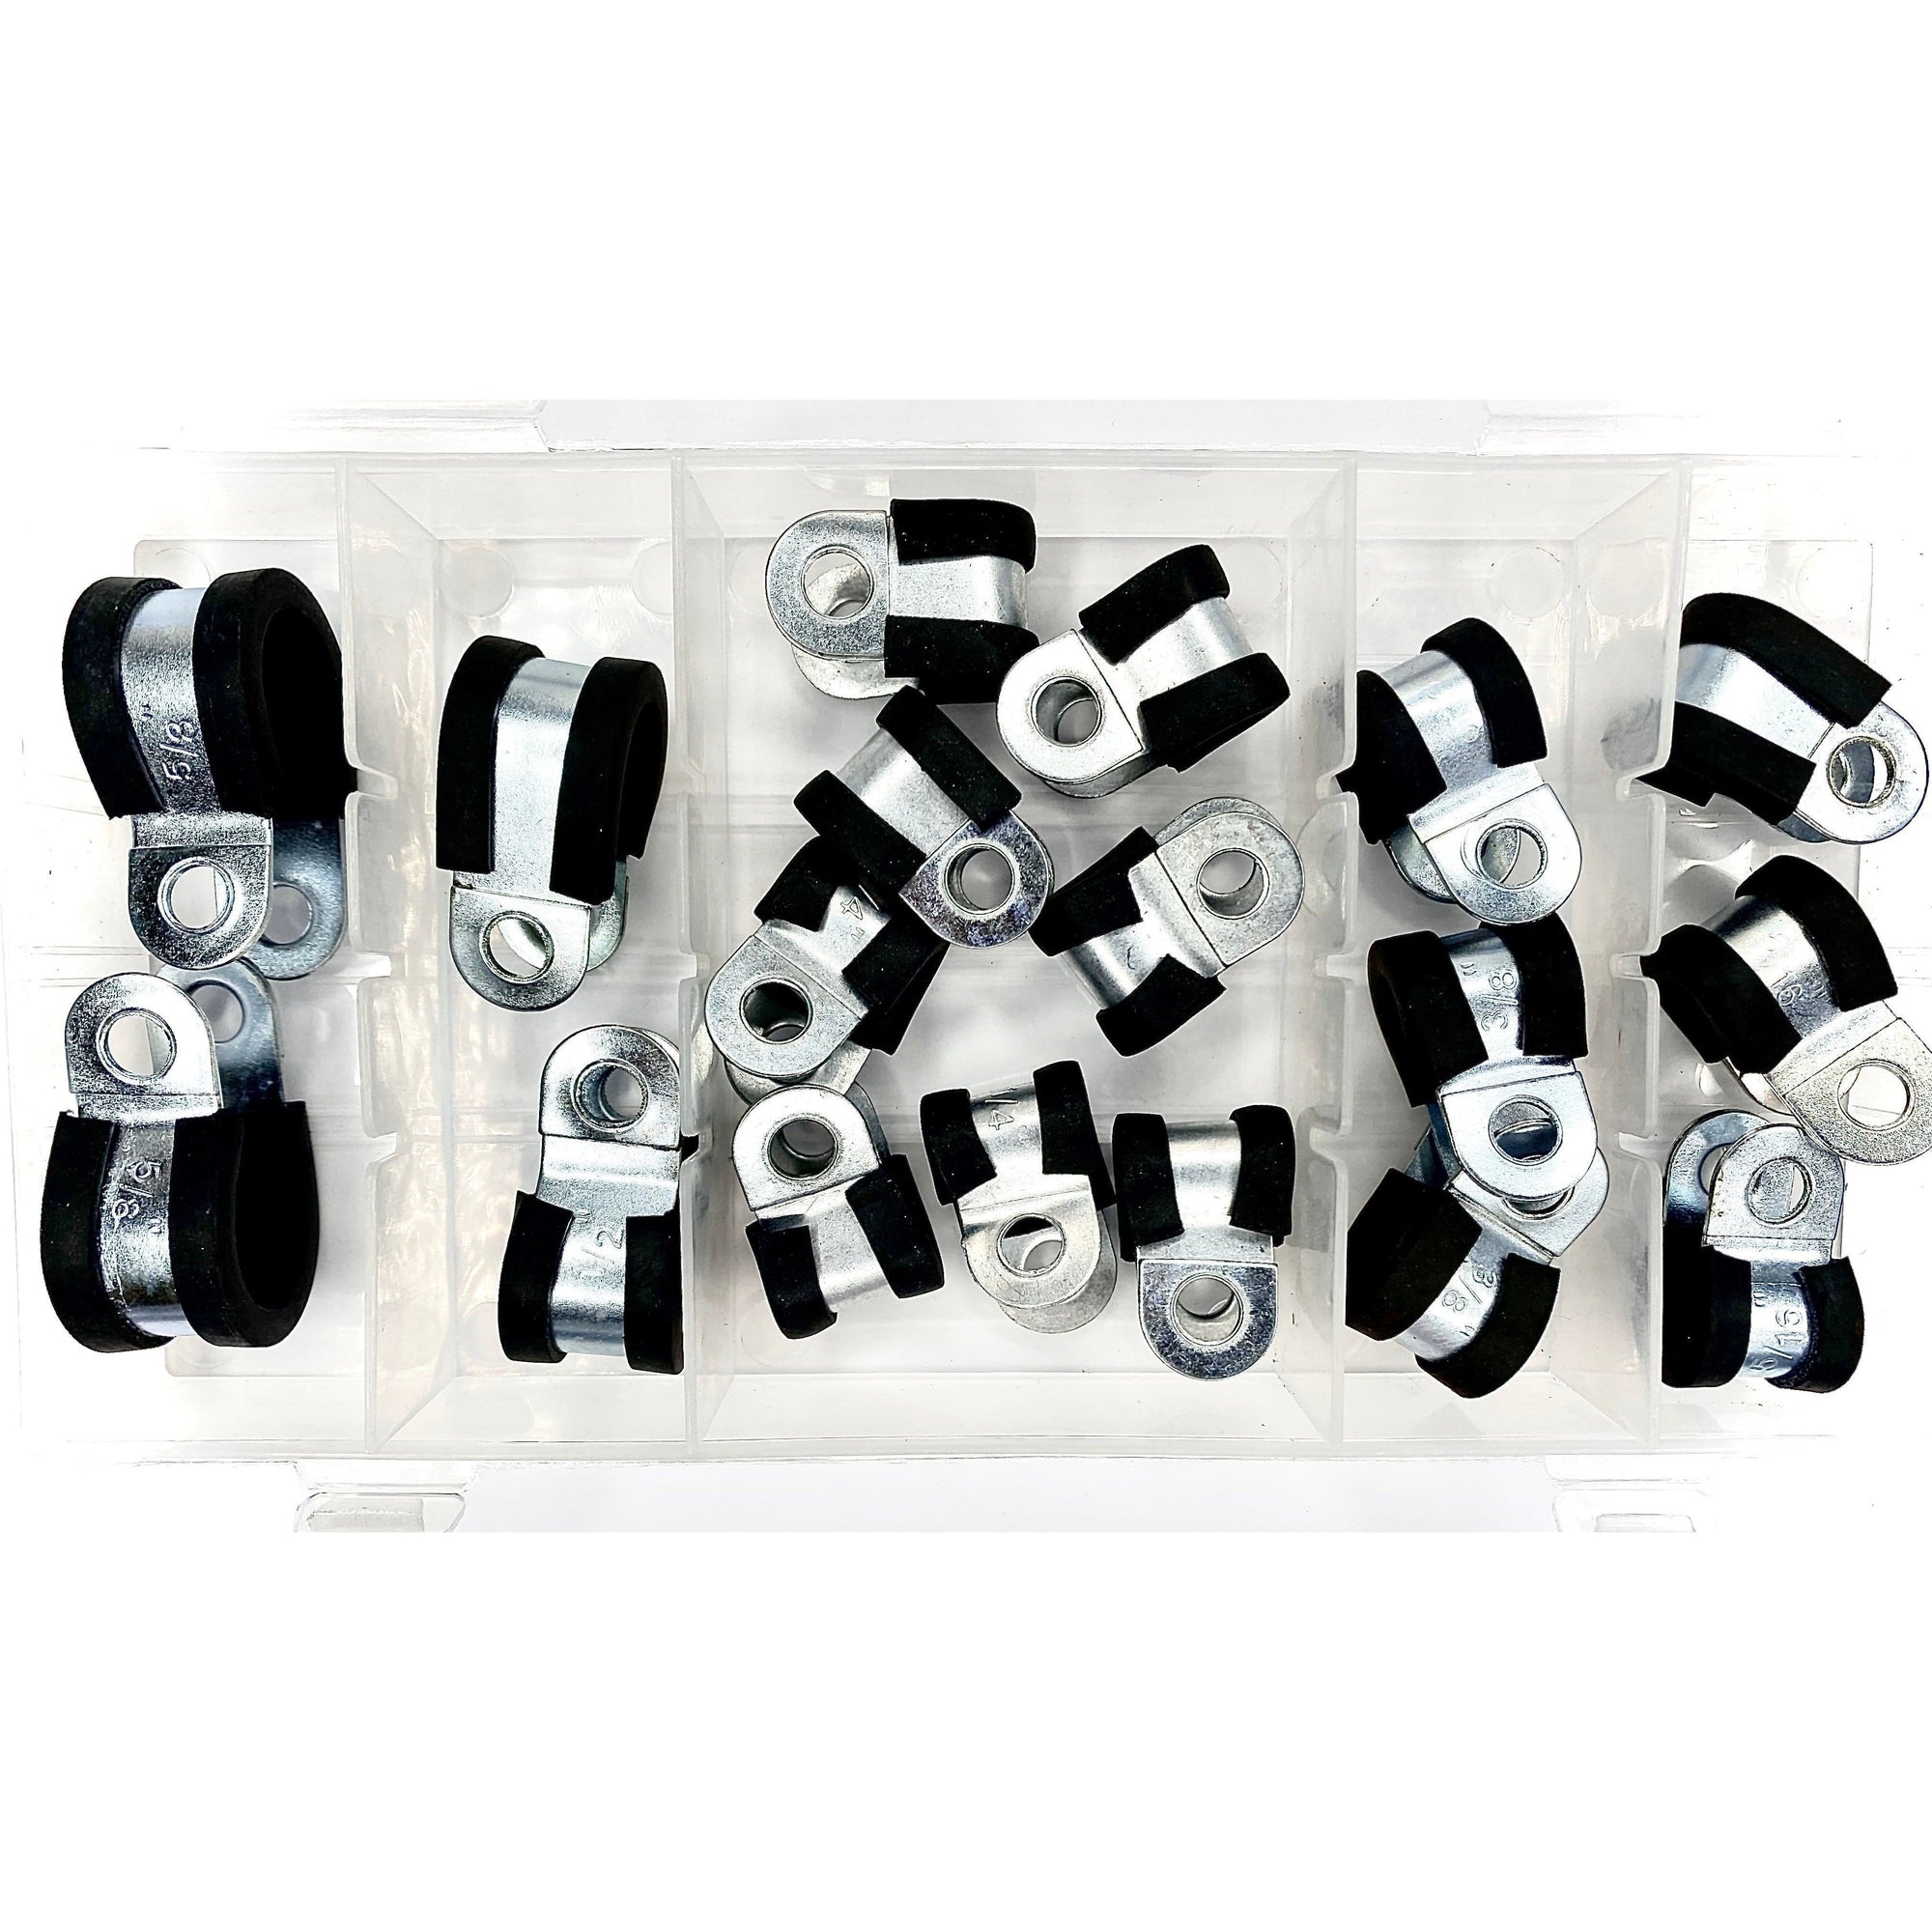 18 Piece Rubber Insulated Clamp Assortment Kit - South East Clearance Centre